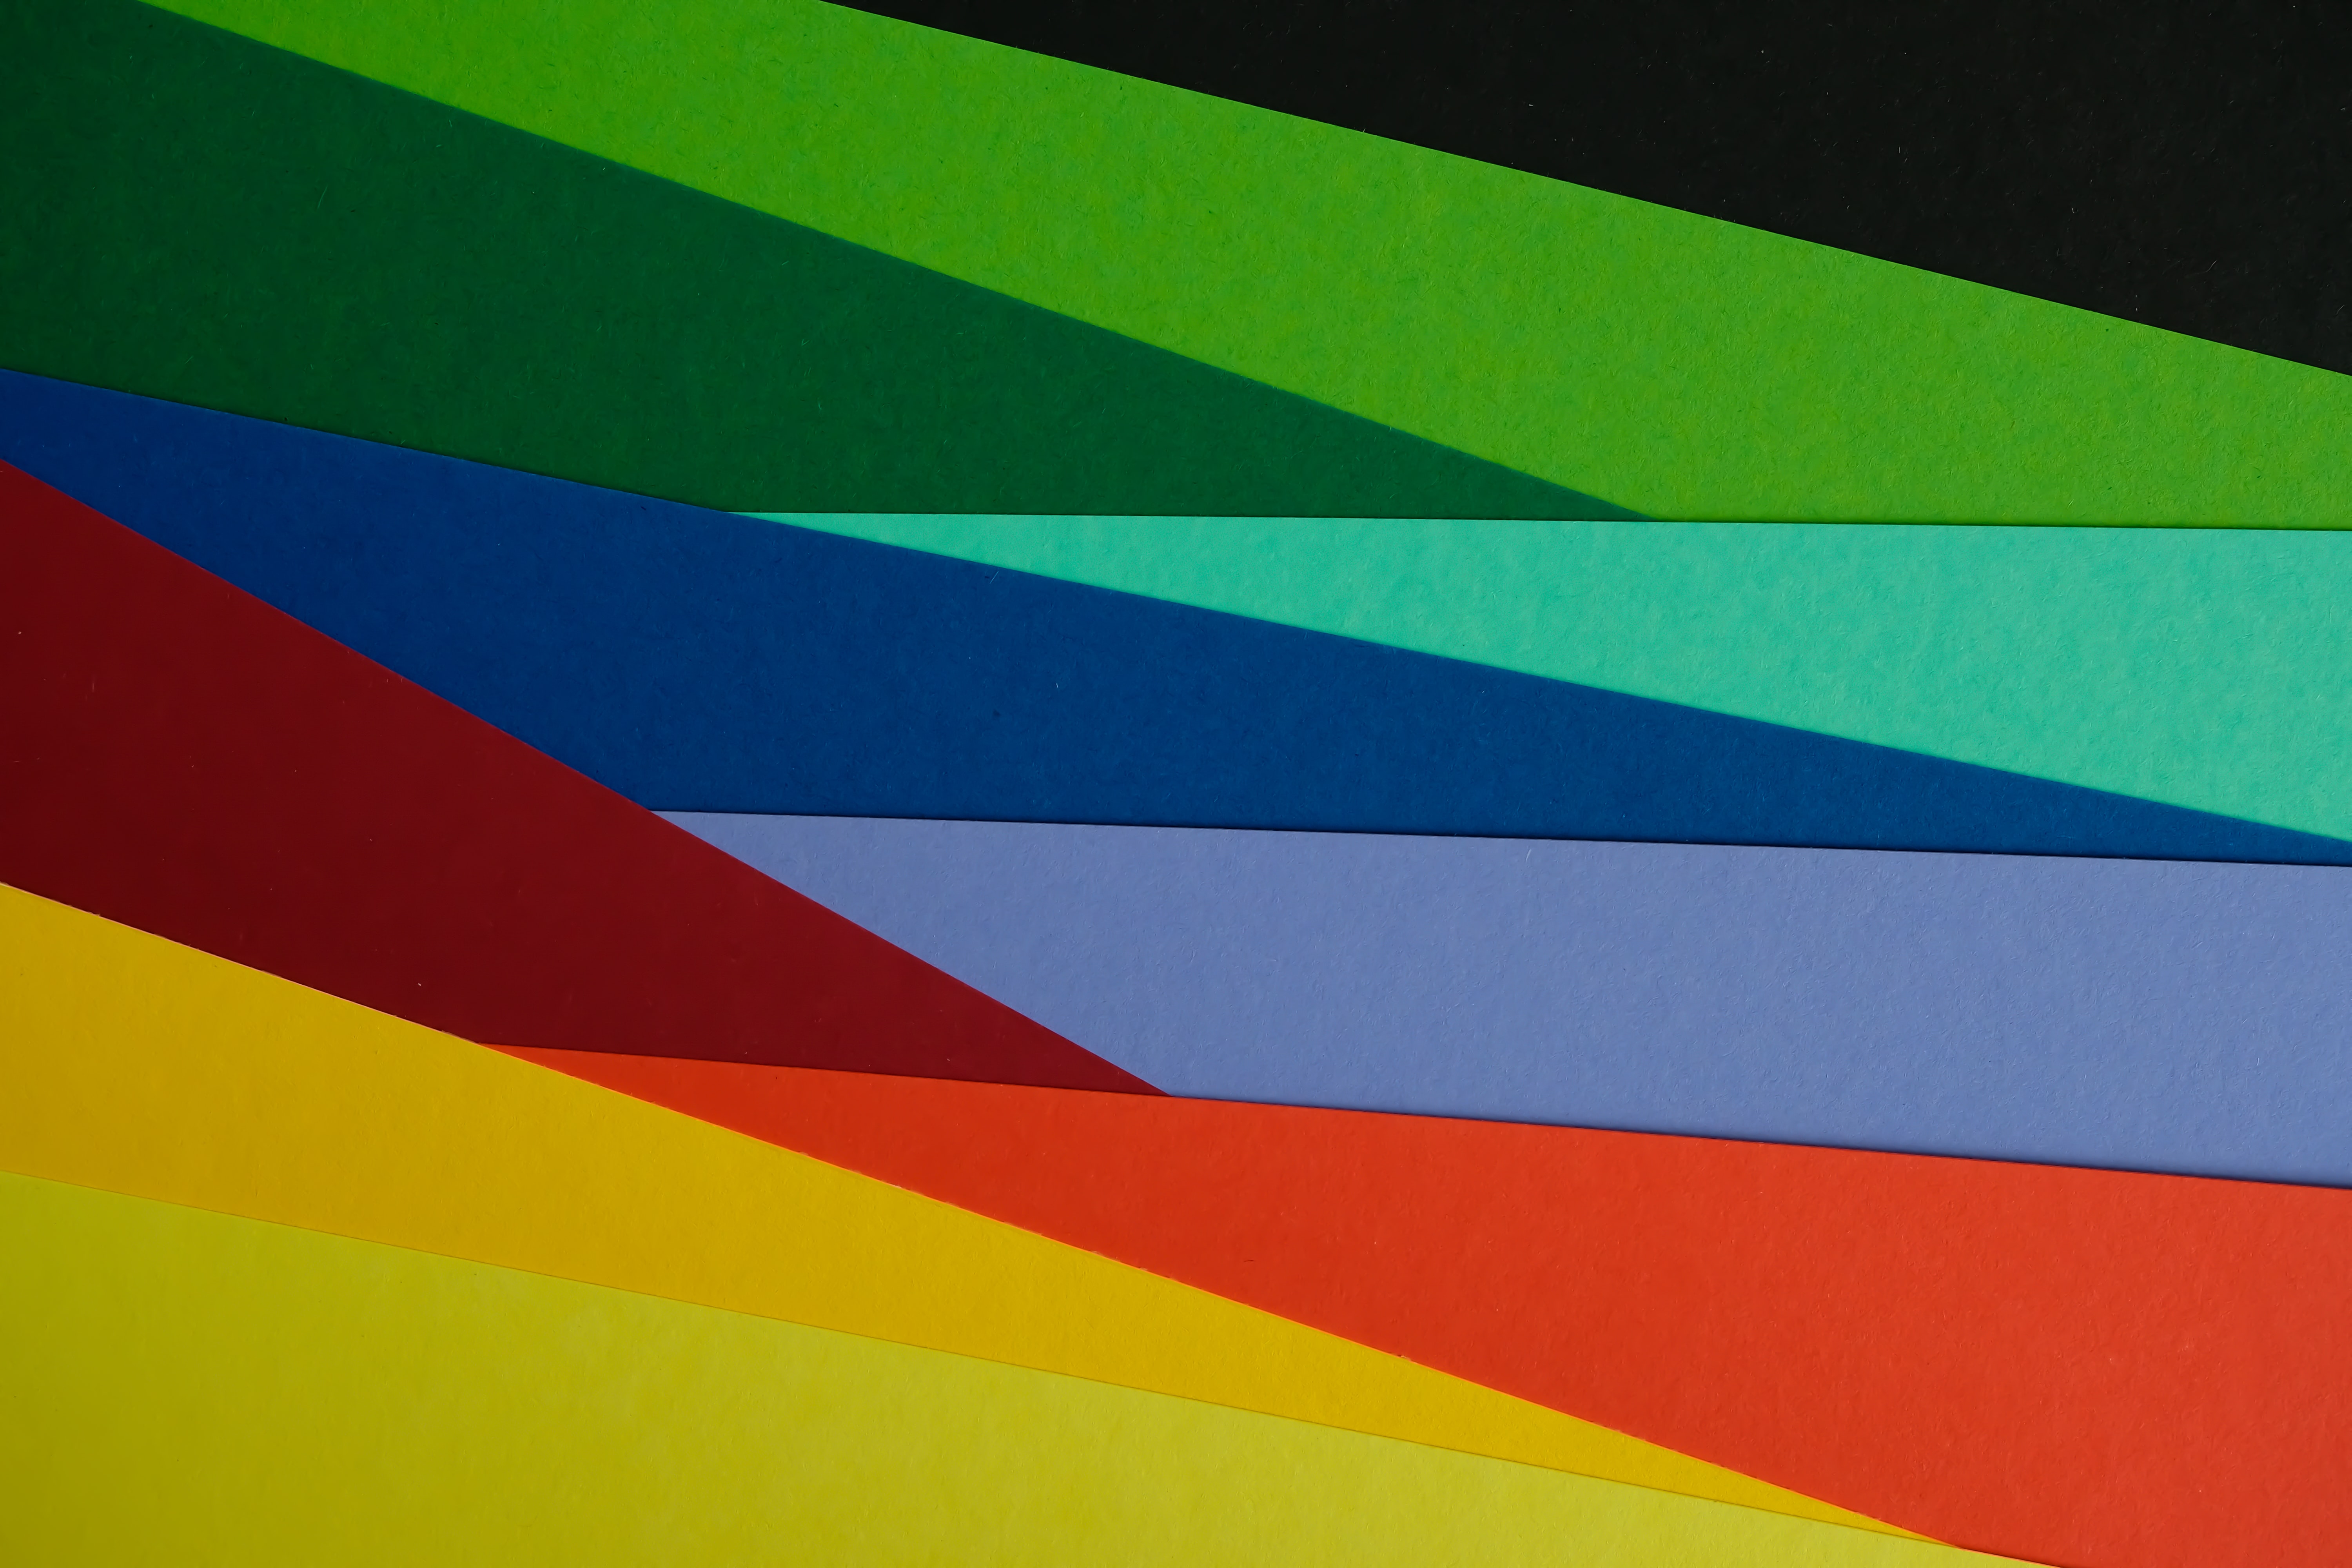 wallpapers color, colors, motley, rainbow, abstract, multicolored, paper